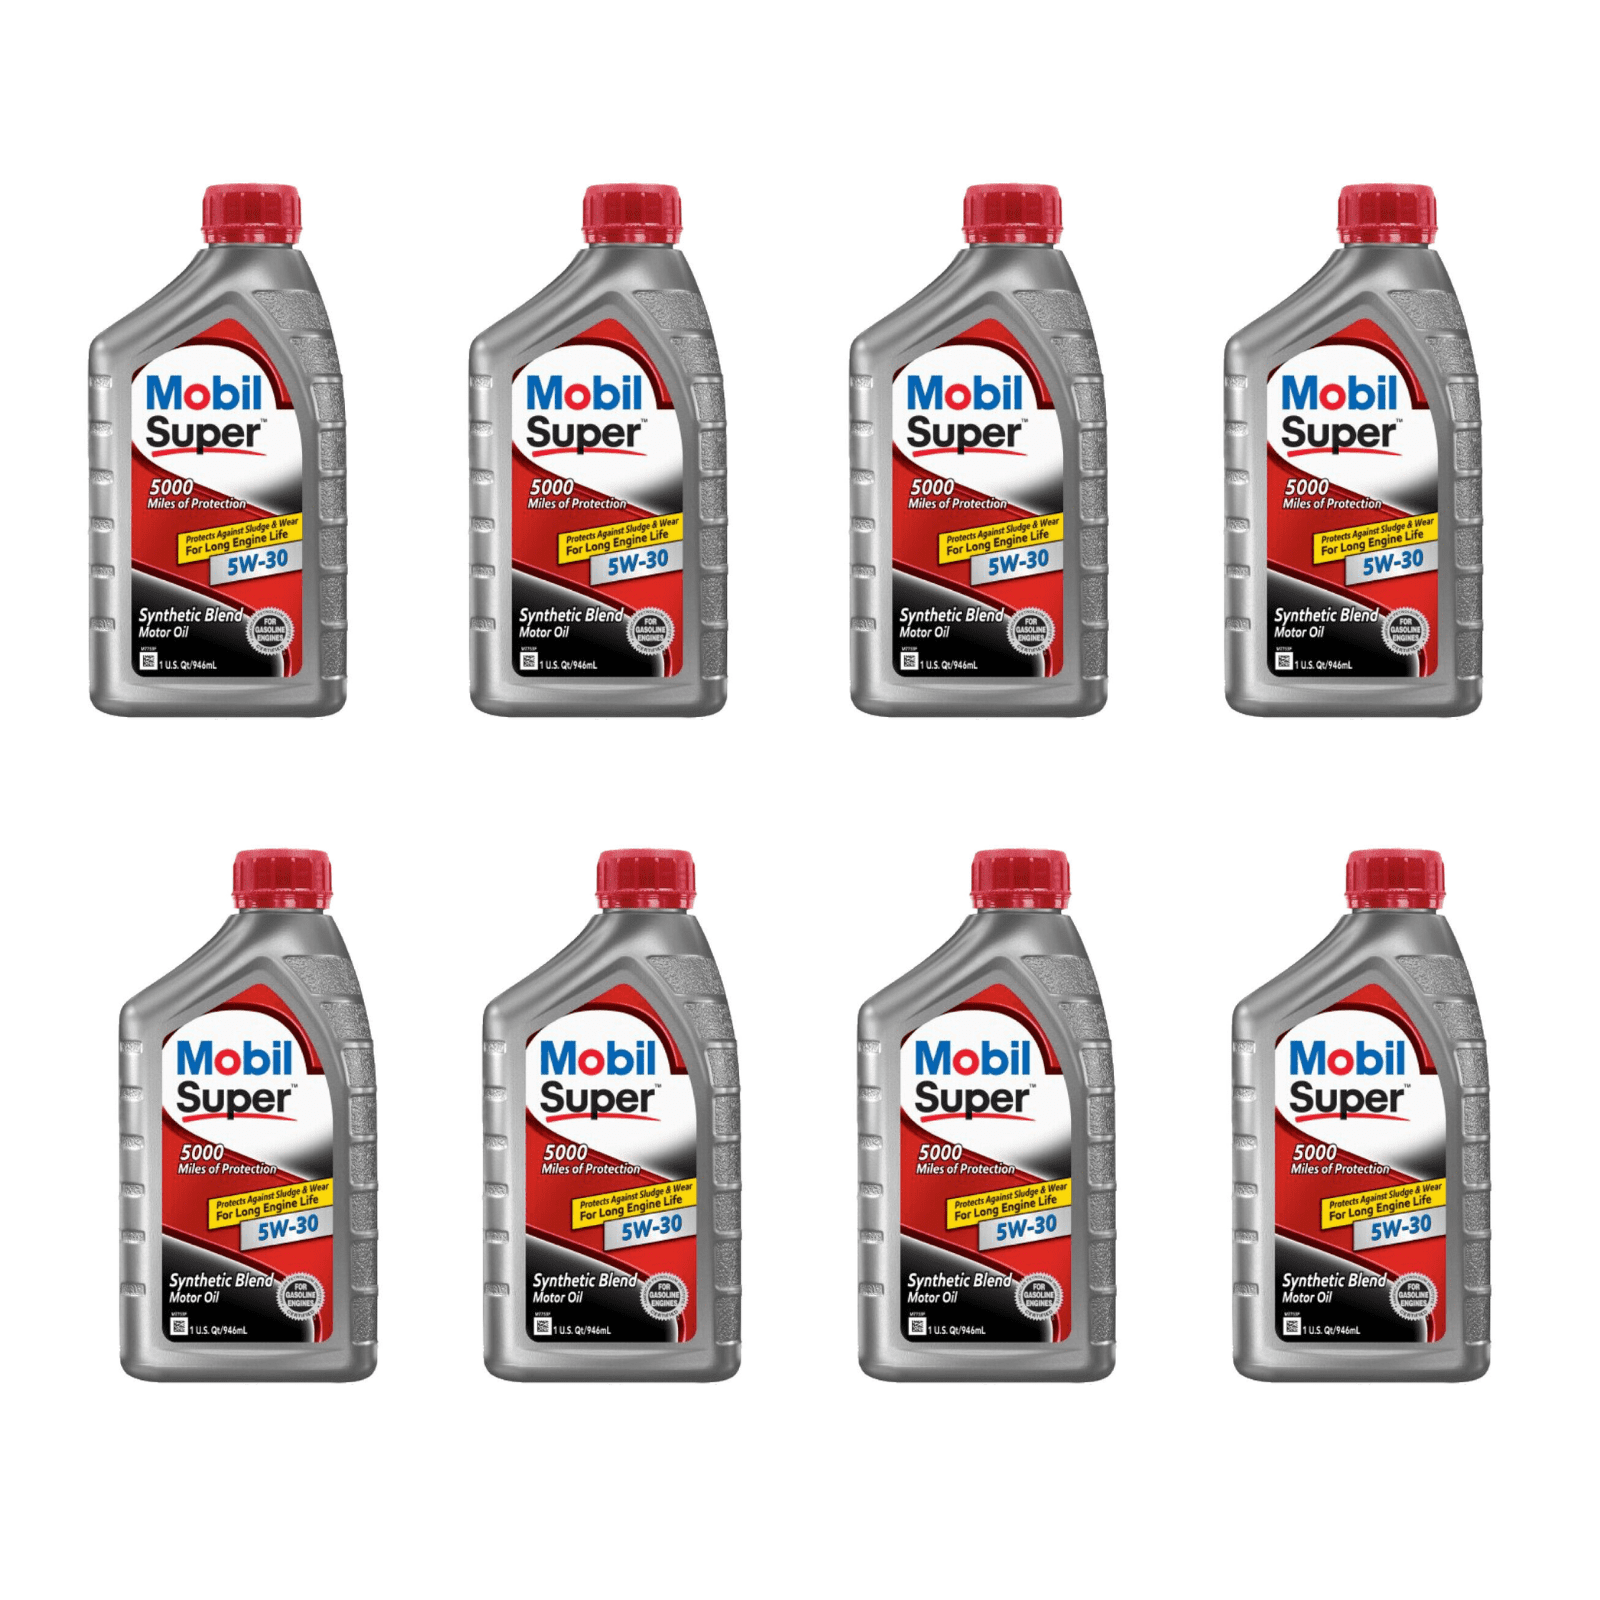 Products - Botogen  Motor Oils, Additives, Car Care & Hygiene Products